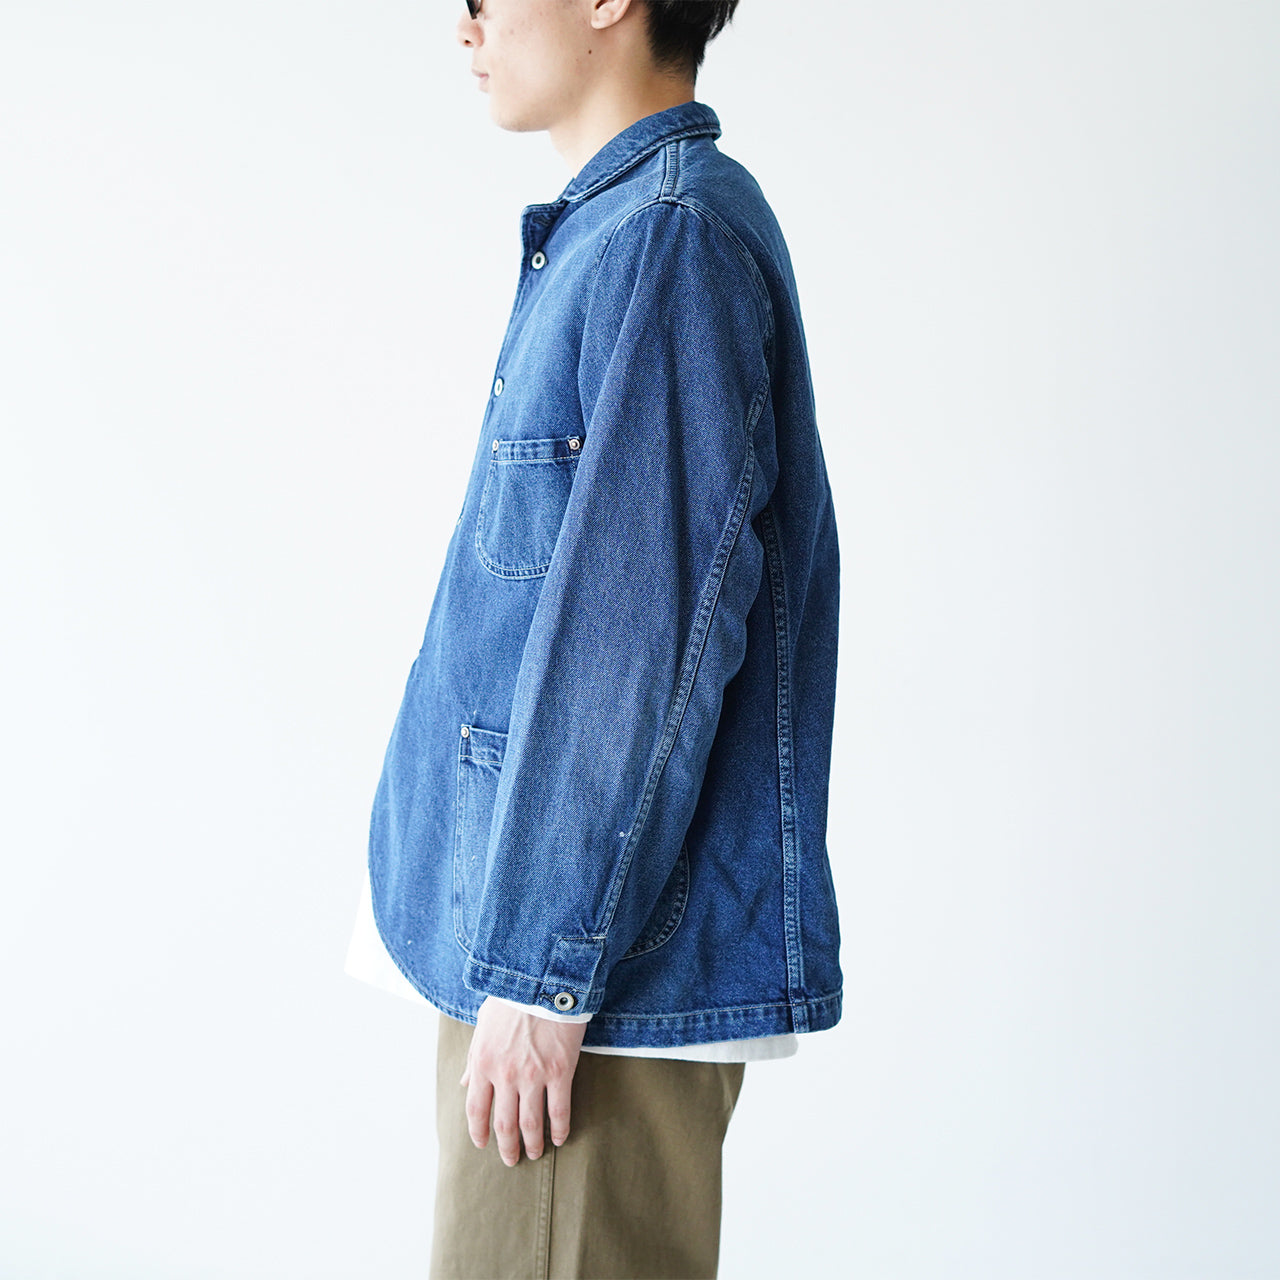 ORDINARY FITS オーディナリーフィッツ  ワーク テーラード カバーオール ジャケット WORK TAILORED COVERALL (USED)  OFC-J003 【送料無料】